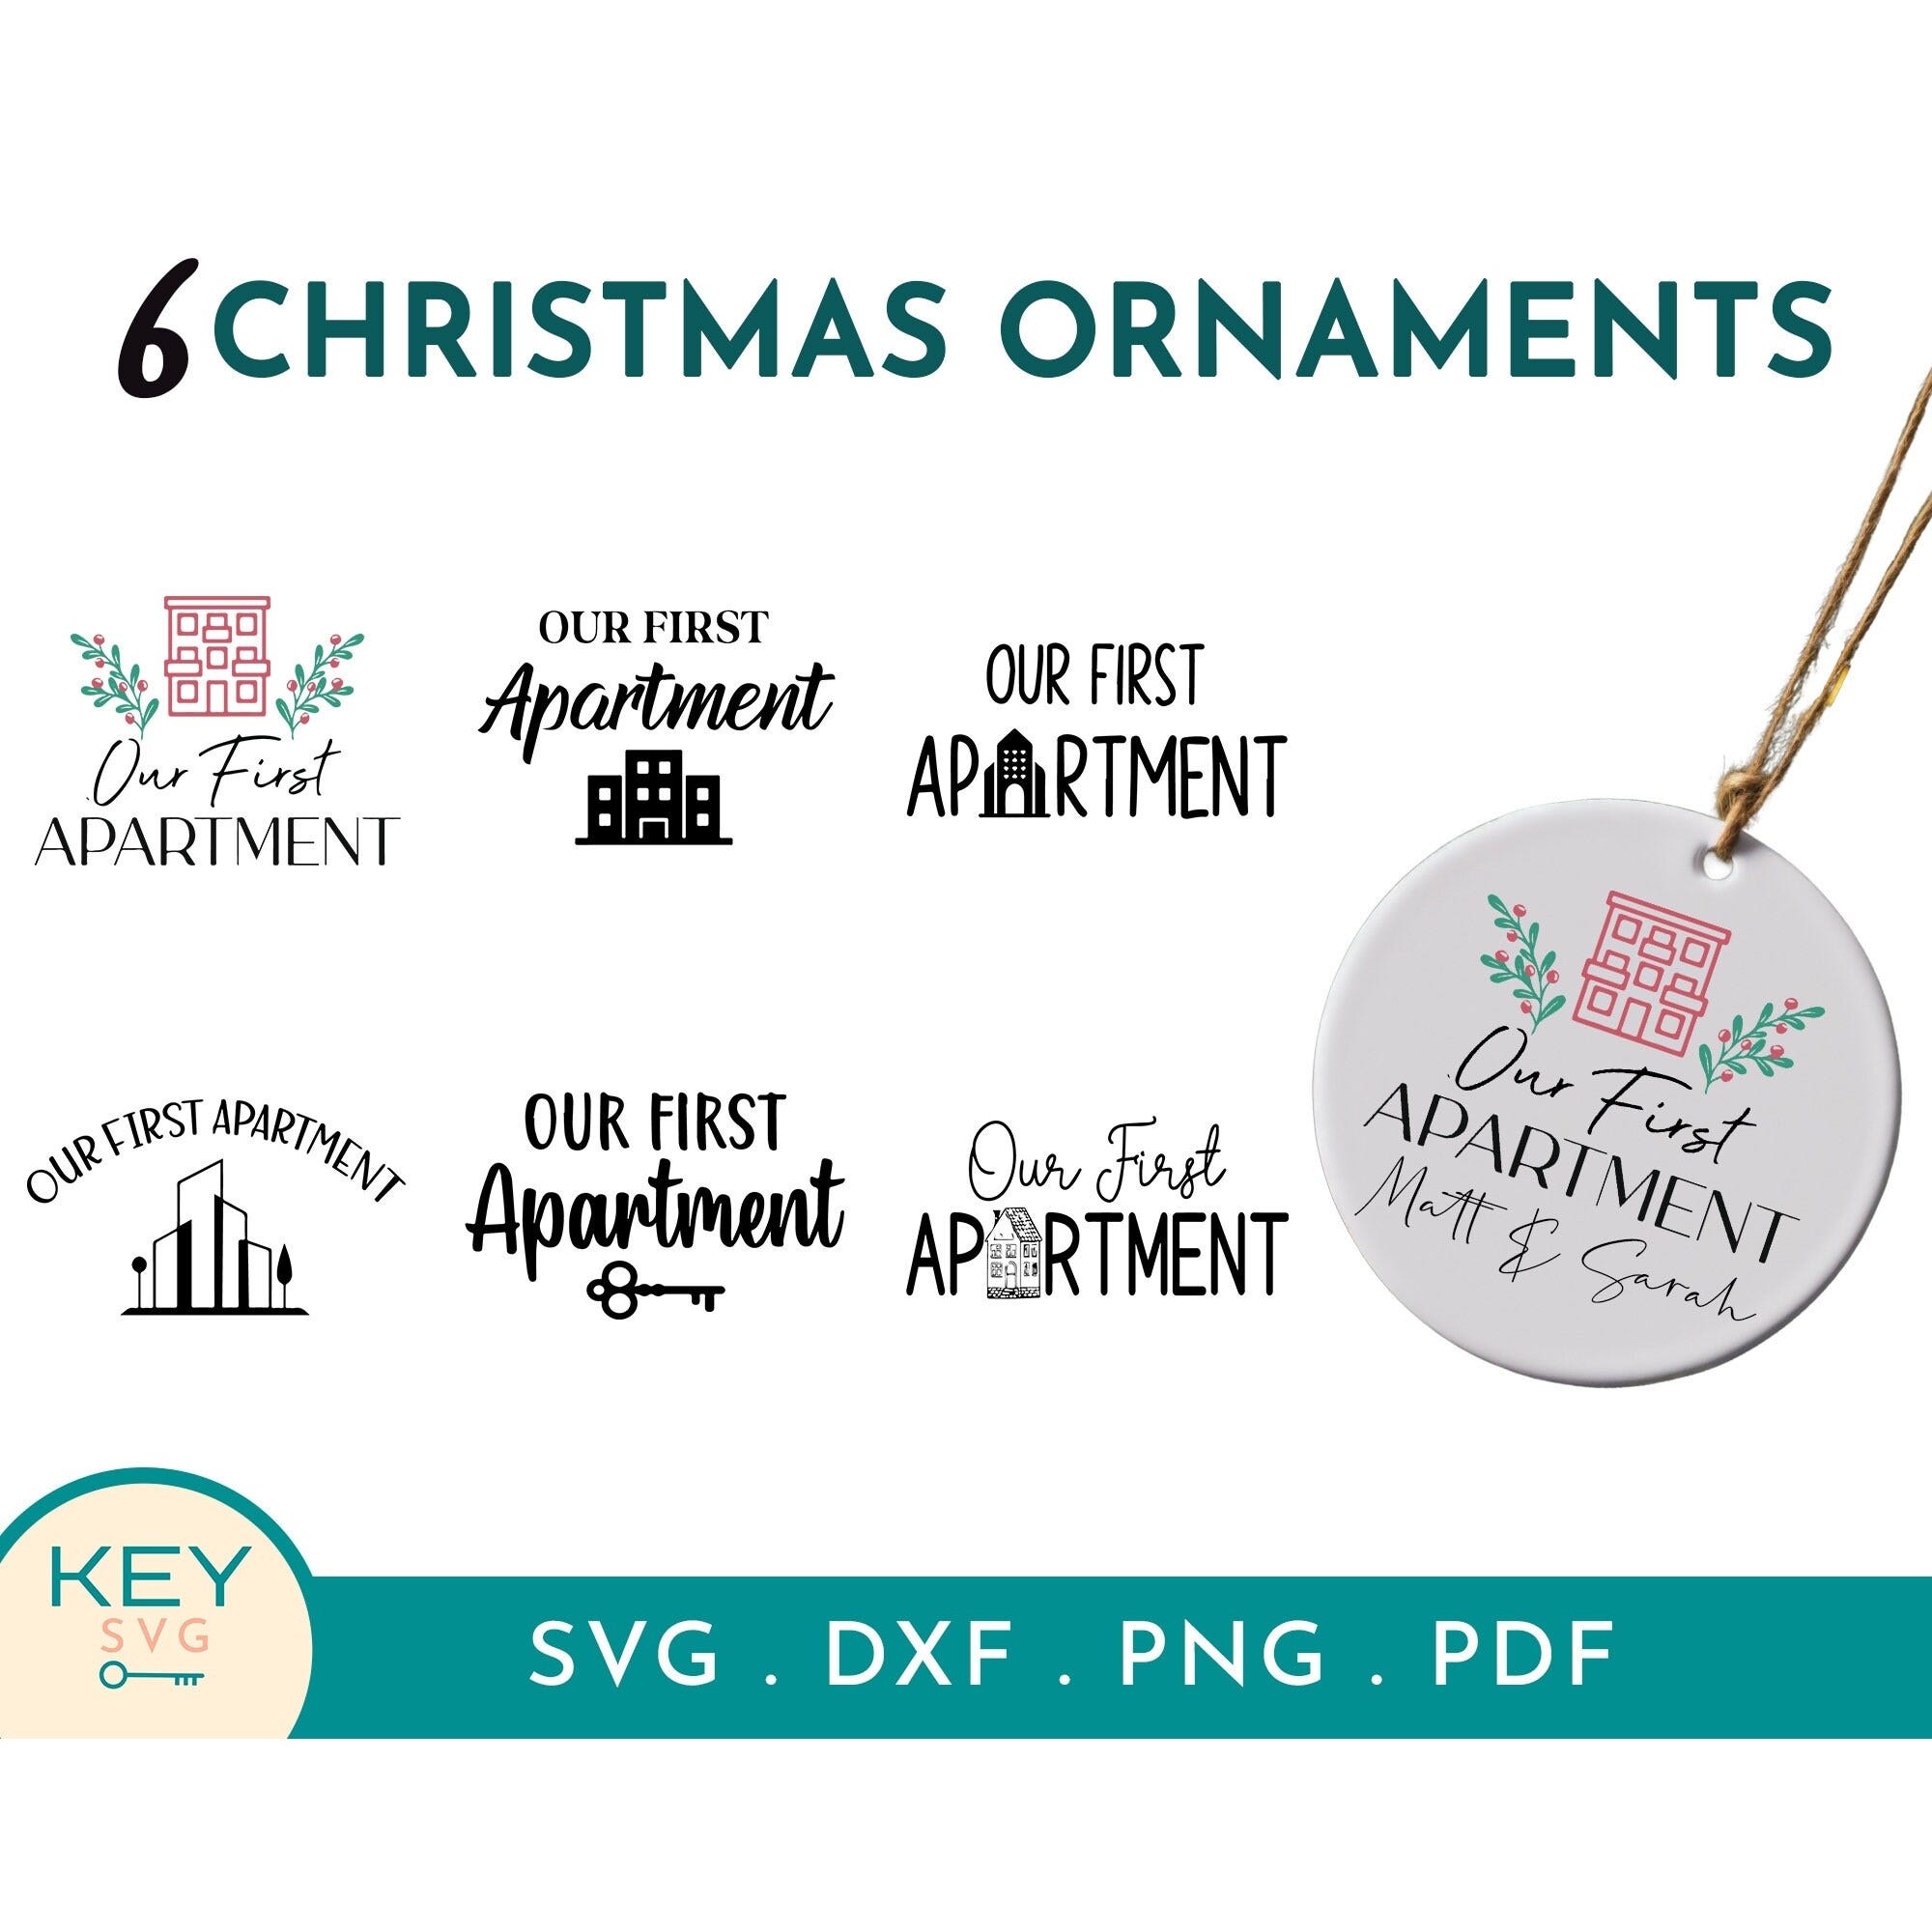 Our First Apartment Christmas Ornament Png, New Apartment Ornament, Family Ornament Png, Round Ornament Png, Our First Christmas Ornament